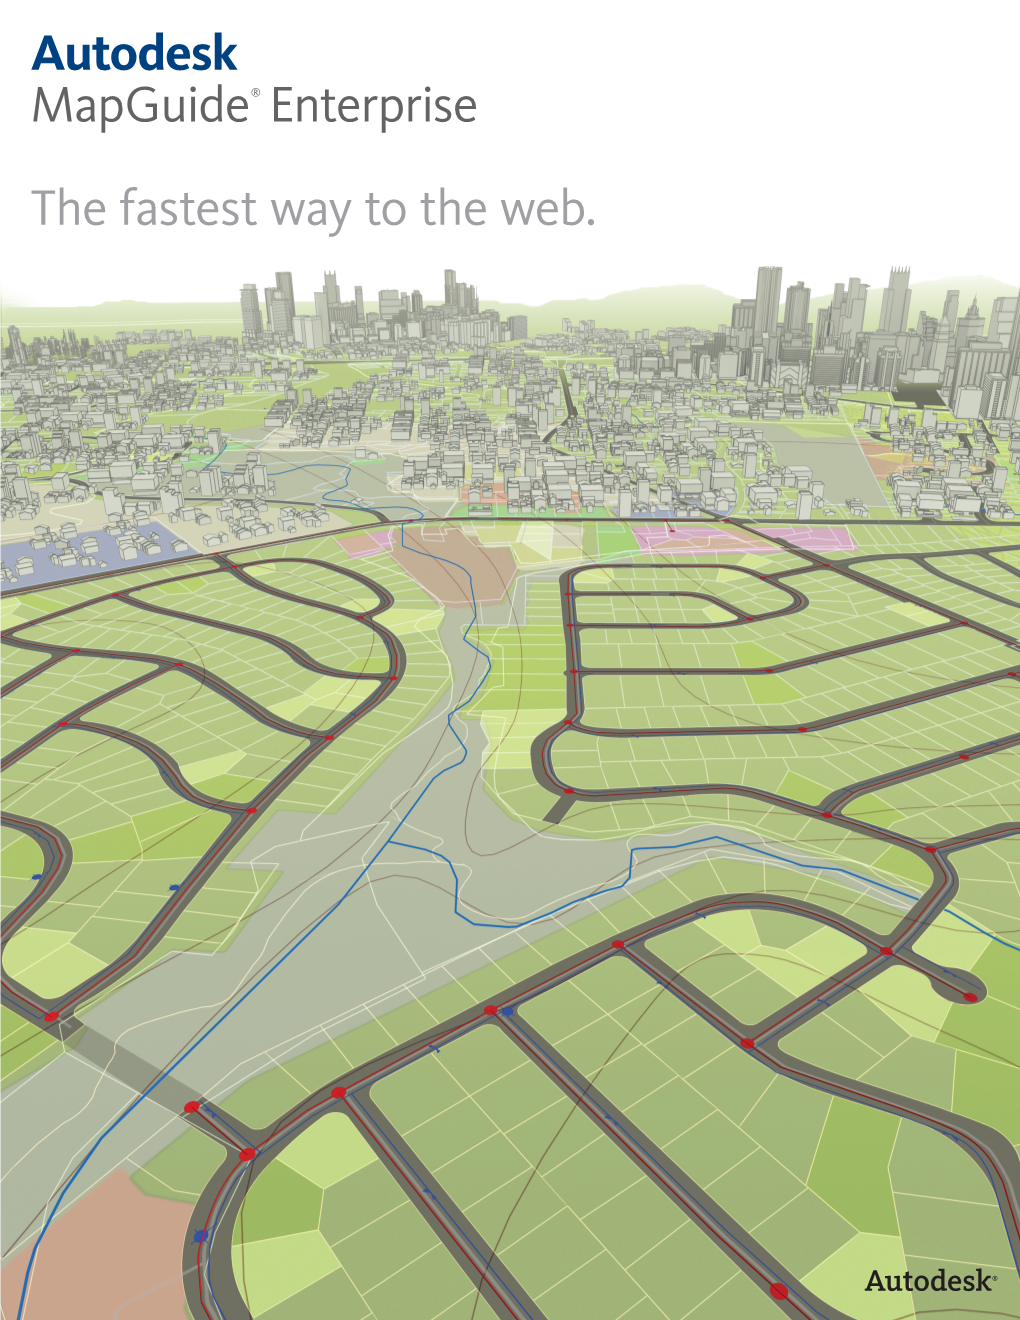 Autodesk Mapguide® Enterprise the Fastest Way to the Web